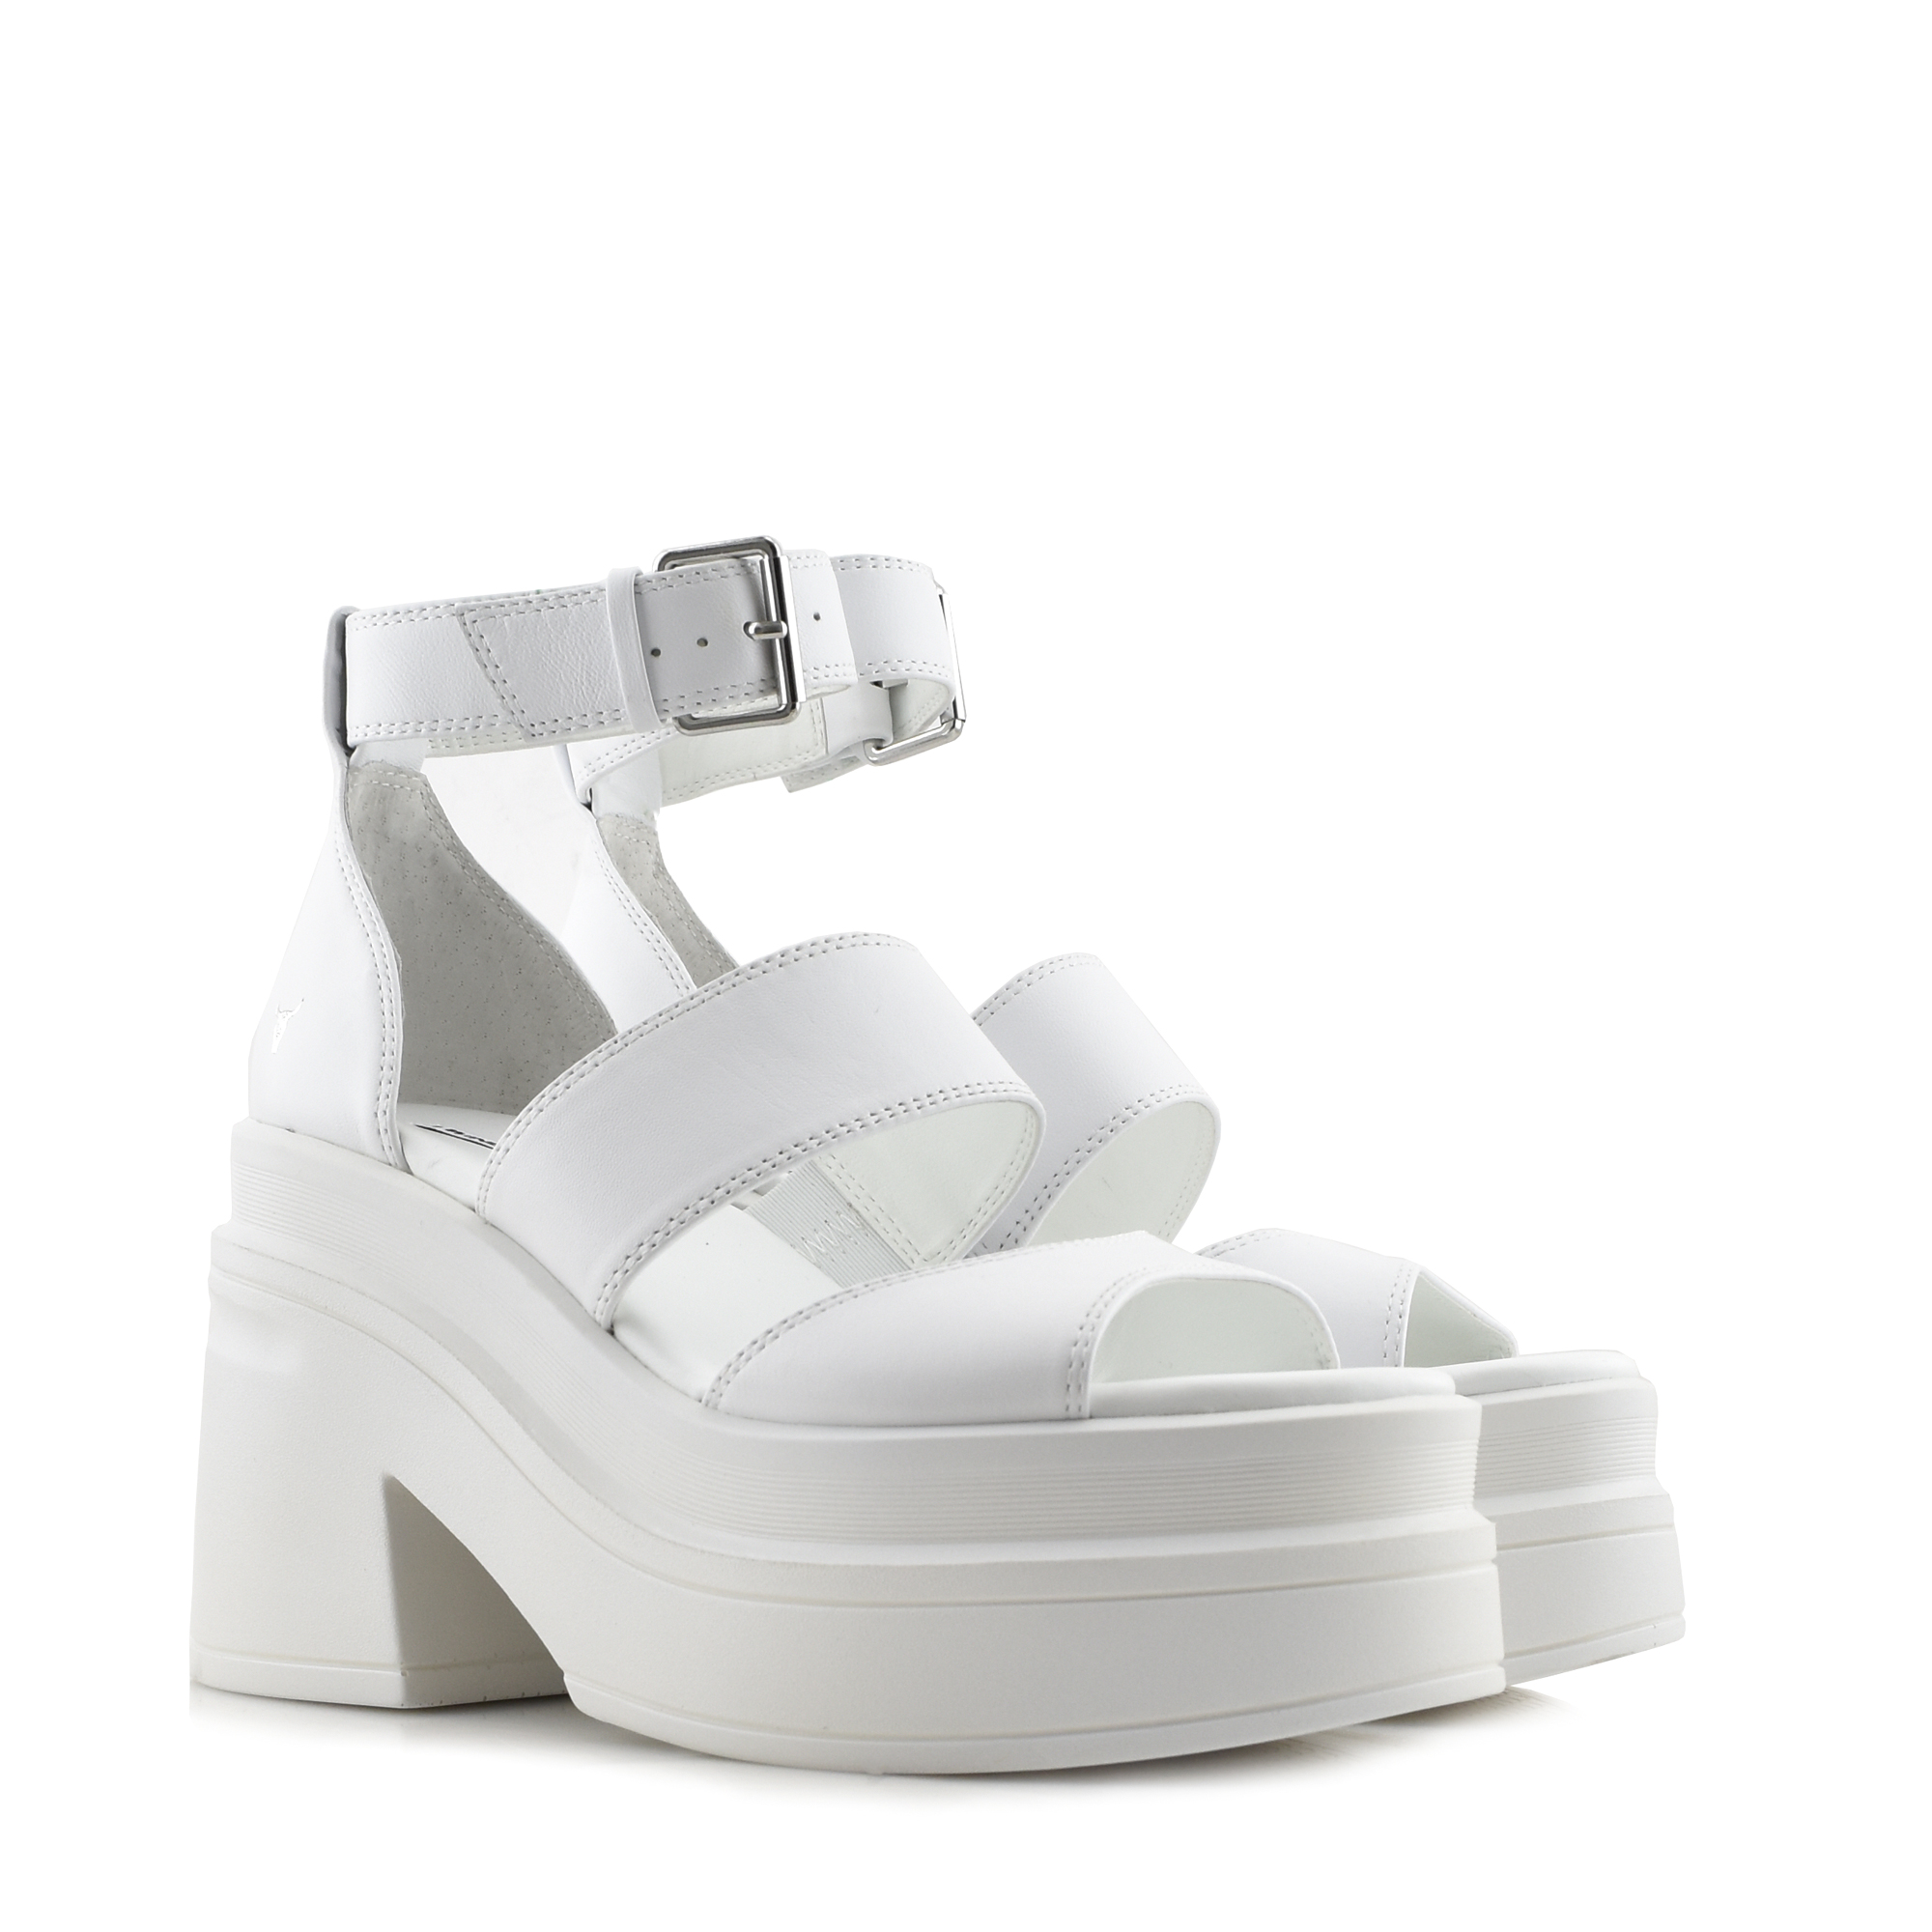 WINDSORSMITH HIGH HEELS SANDALS IN WHITE LEATHER - MATCH | DION shop ...